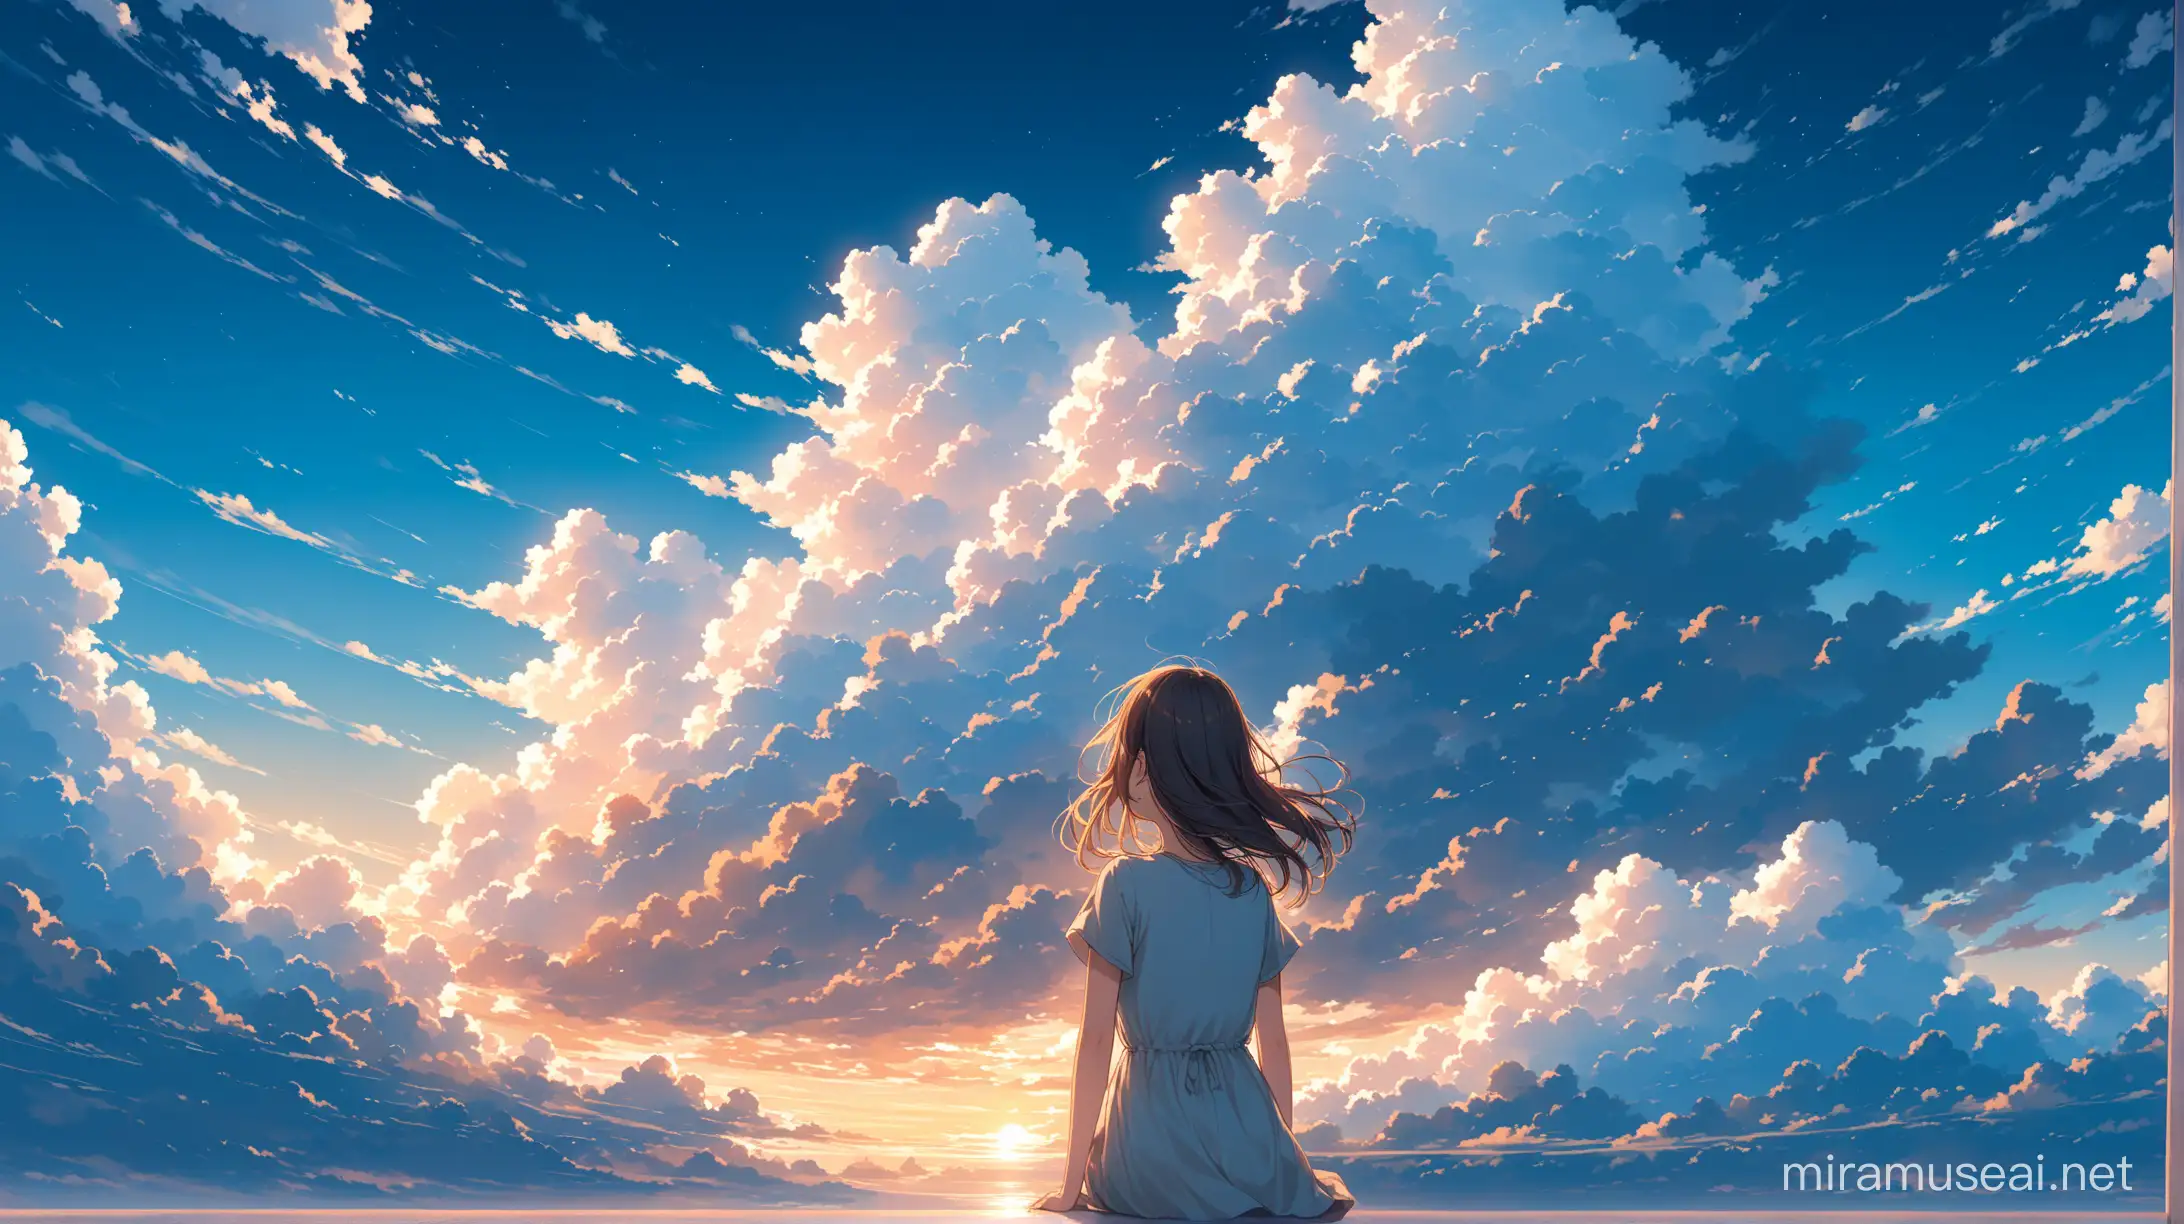 Girl Falling through Sky Watching Clouds like Weathering with You Scene